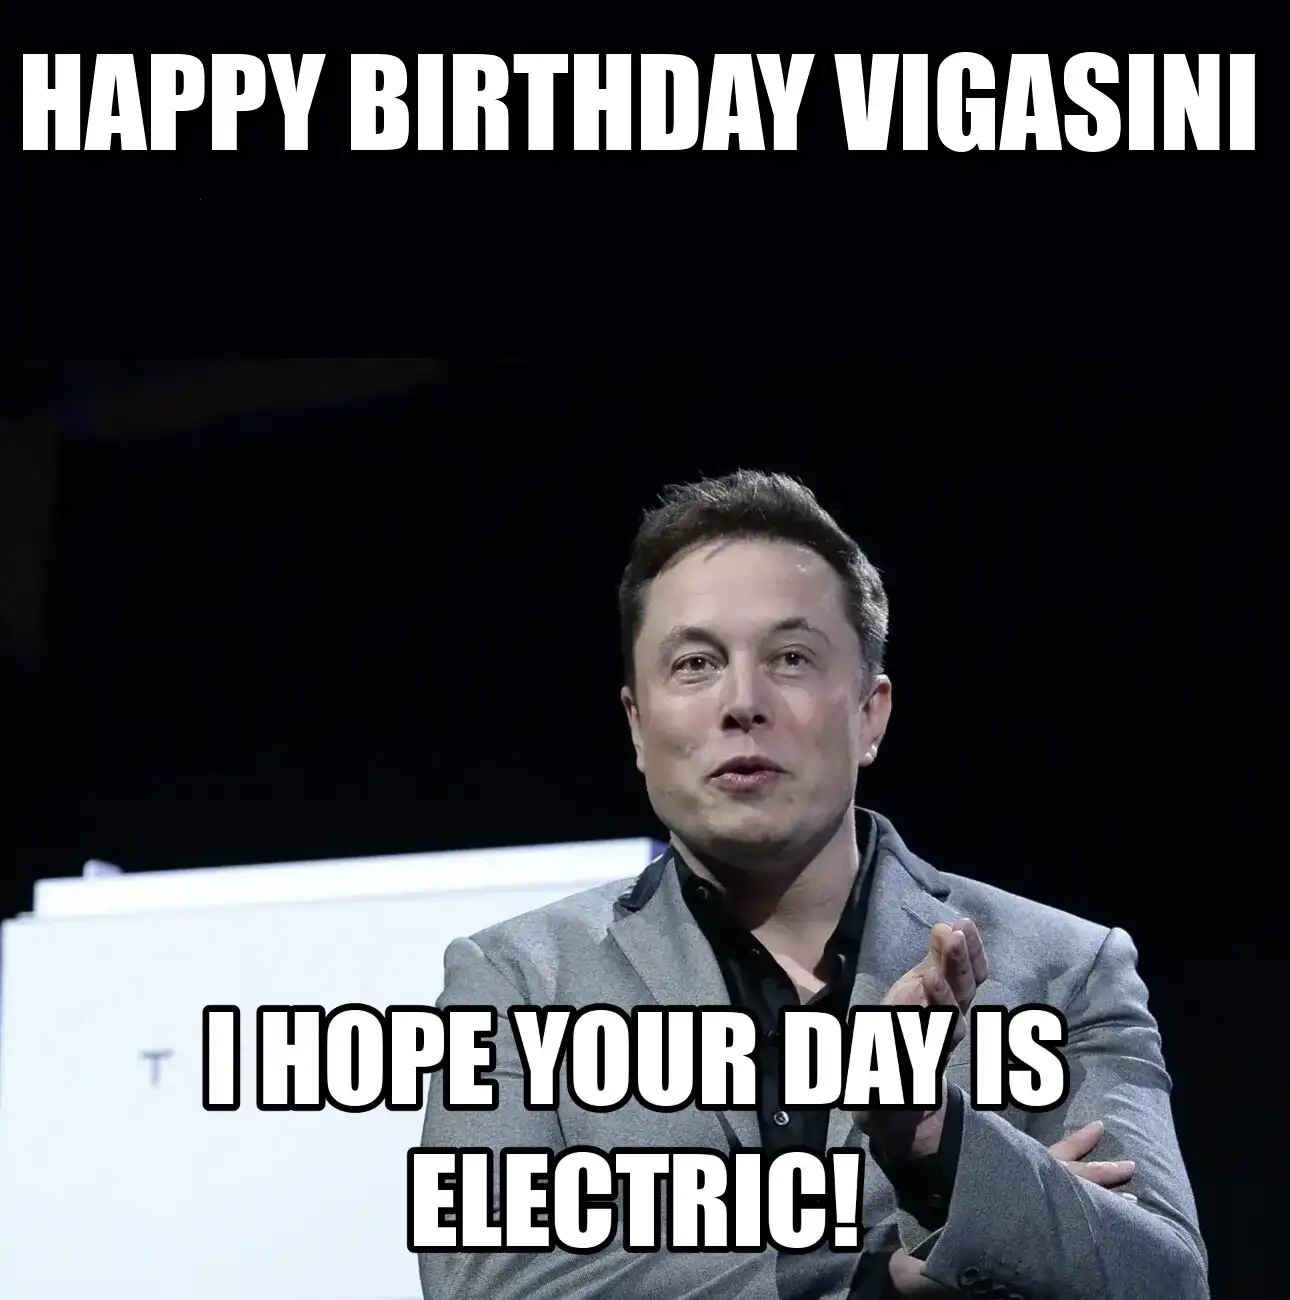 Happy Birthday Vigasini I Hope Your Day Is Electric Meme